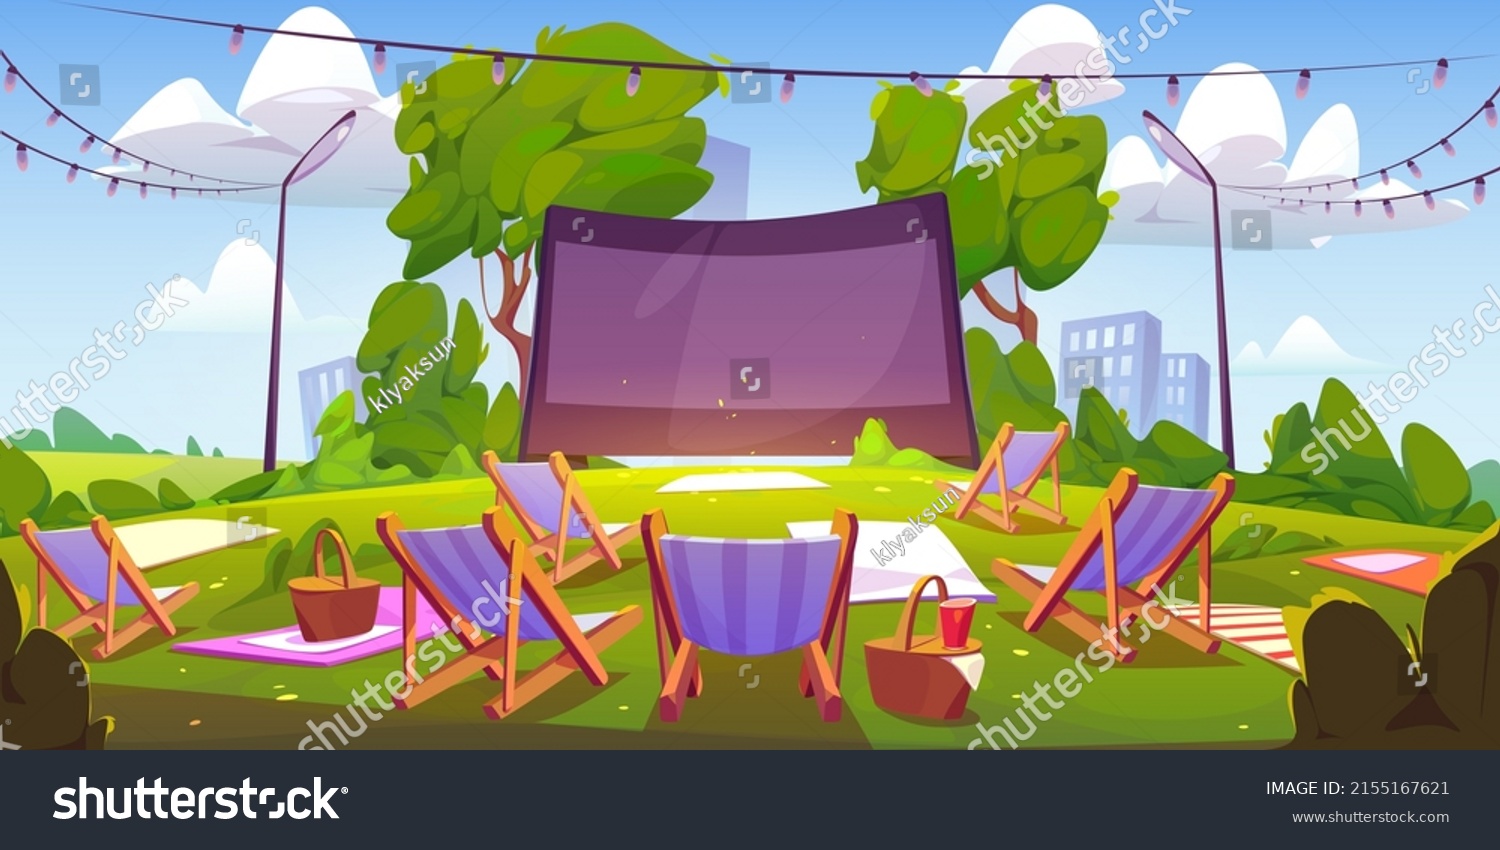 Open air cinema on green lawn in city park, garden or backyard. Vector cartoon summer landscape with empty outdoor movie theater with big screen, chaises, picnic baskets and blankets on grass #2155167621